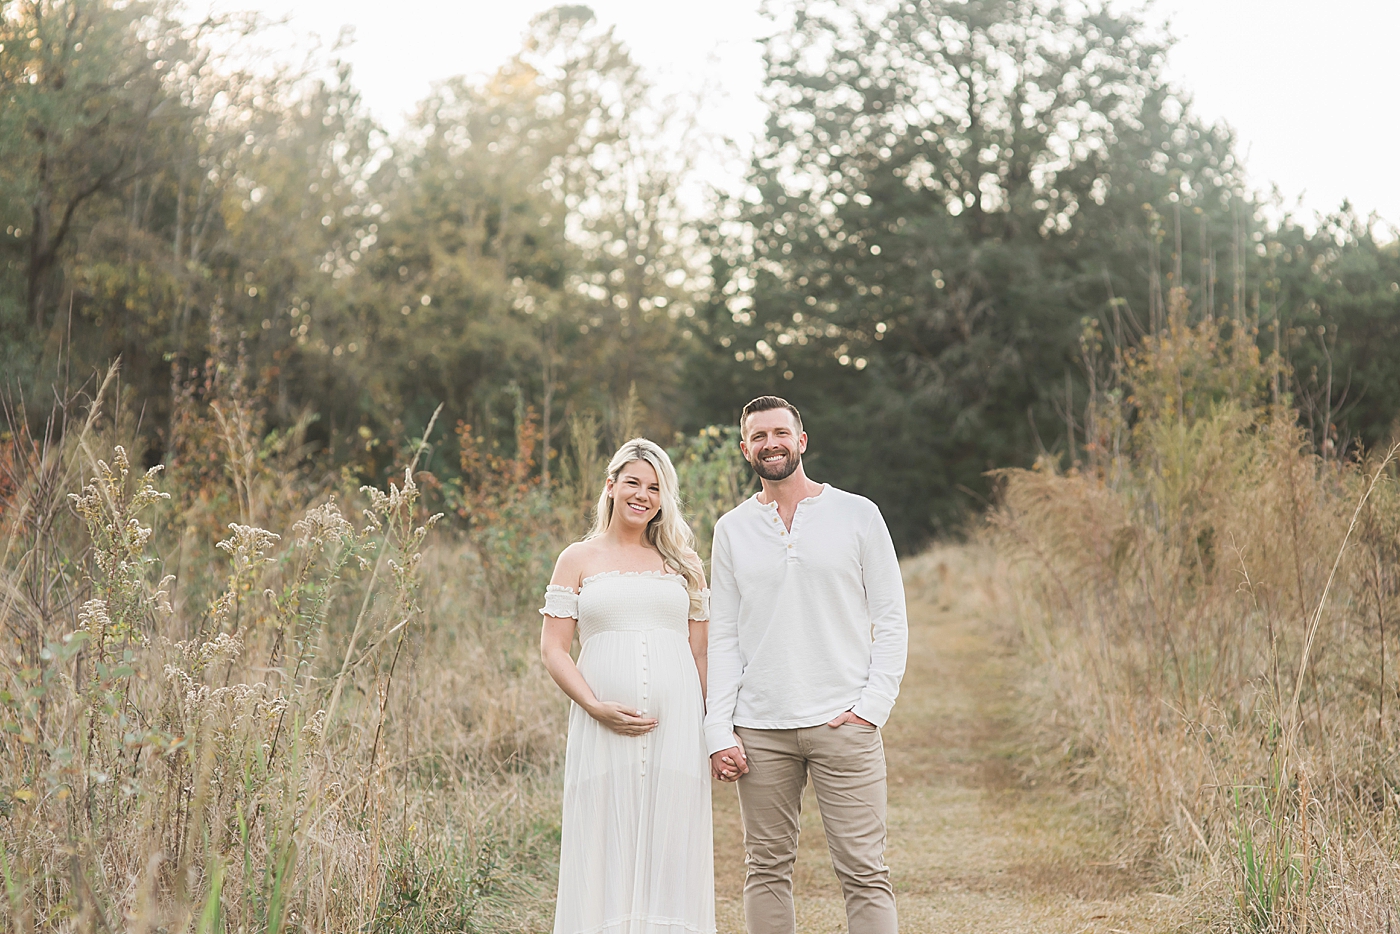 Couple in white during maternity session | Photo by Anna Wisjo